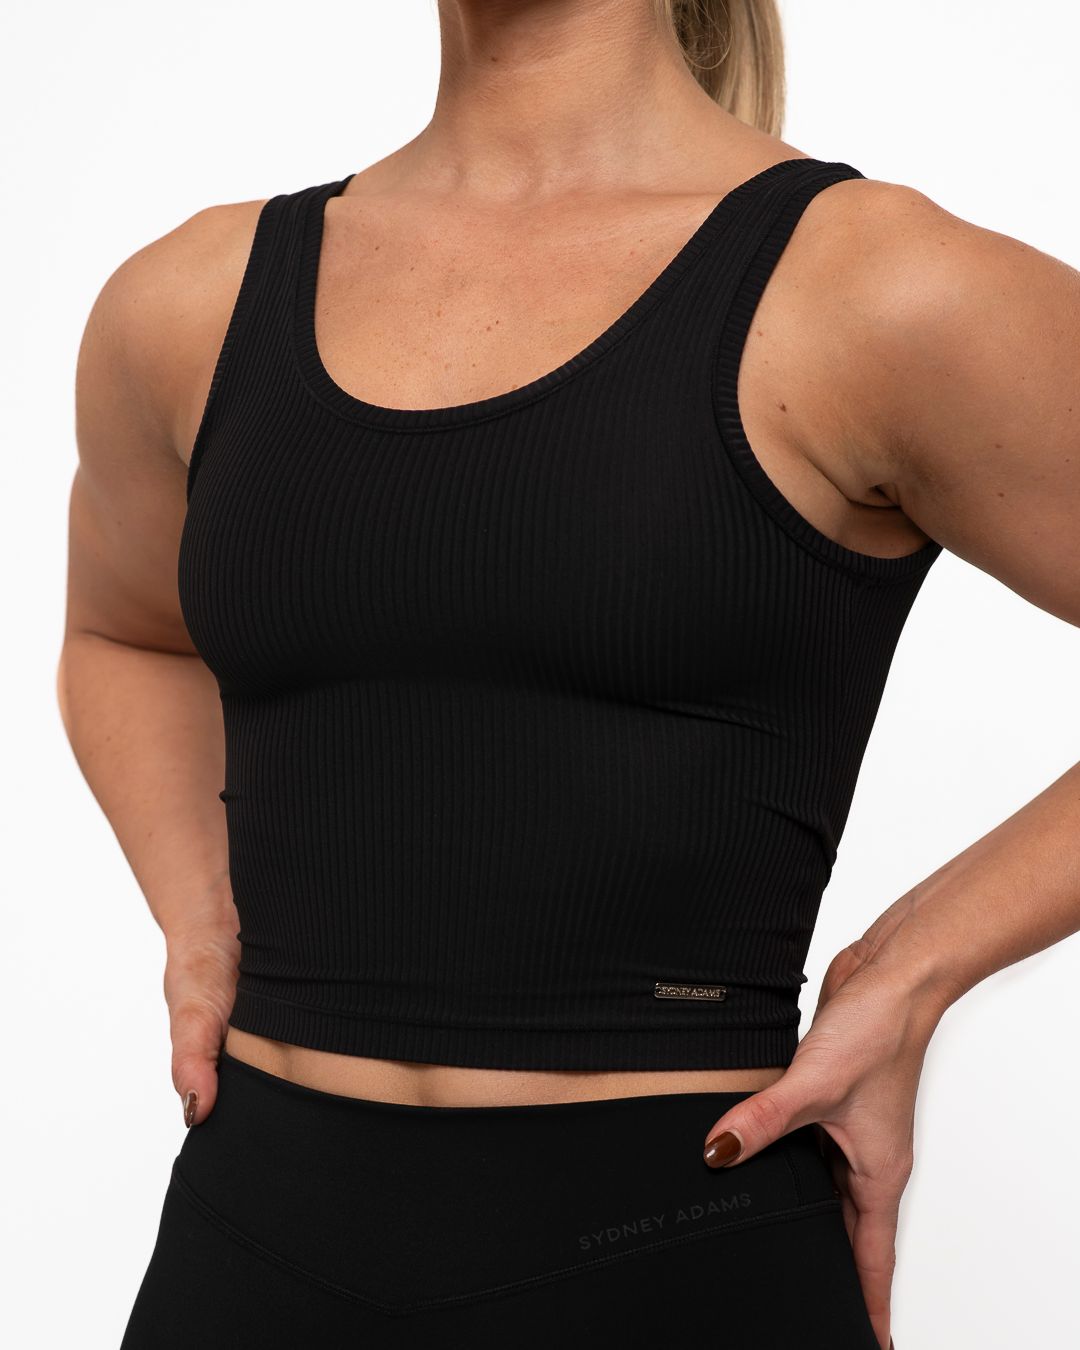 Core Tank (RibbedFit Fabric) - The Sydney Adams Collection